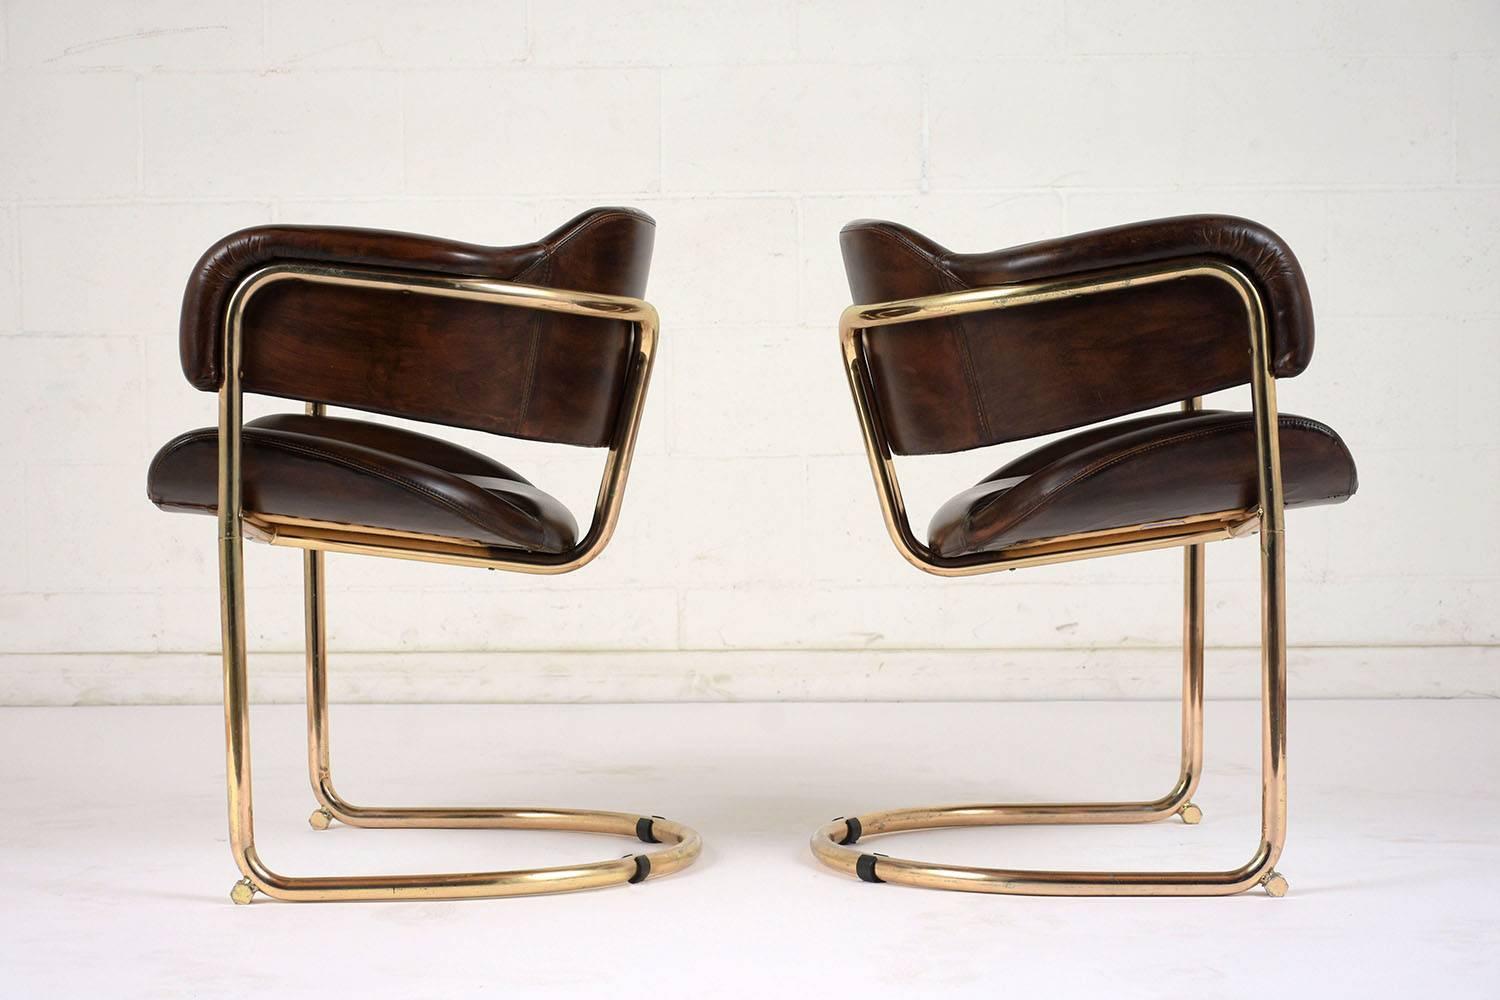 20th Century Pair of Mid-Century Modern Leather and Chrome Armchairs